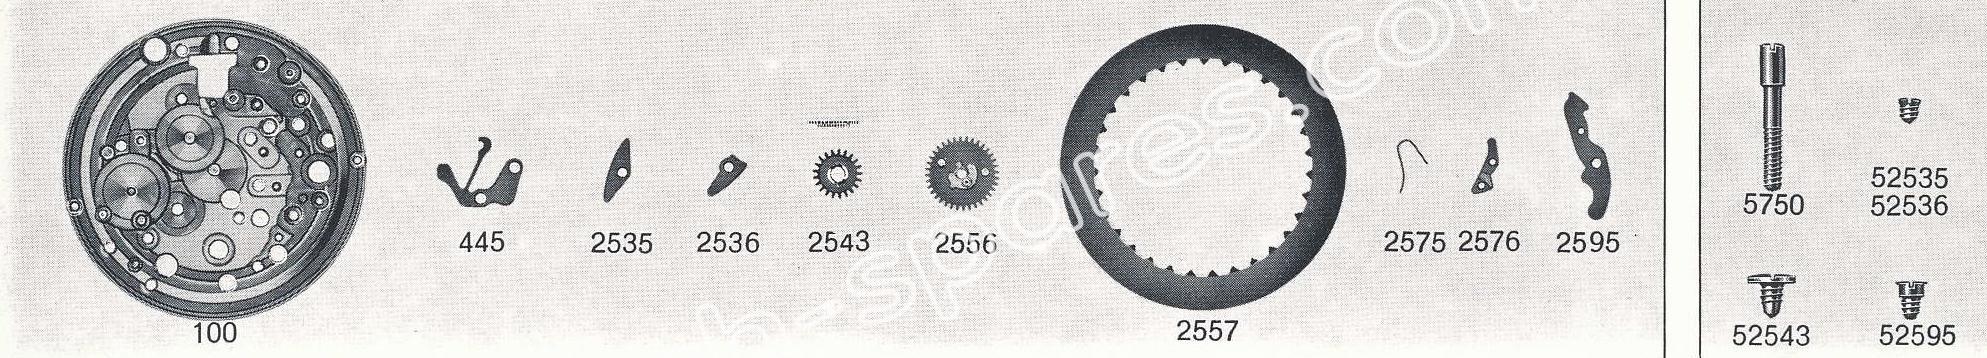 Standard ST 96.4 watch date spare parts